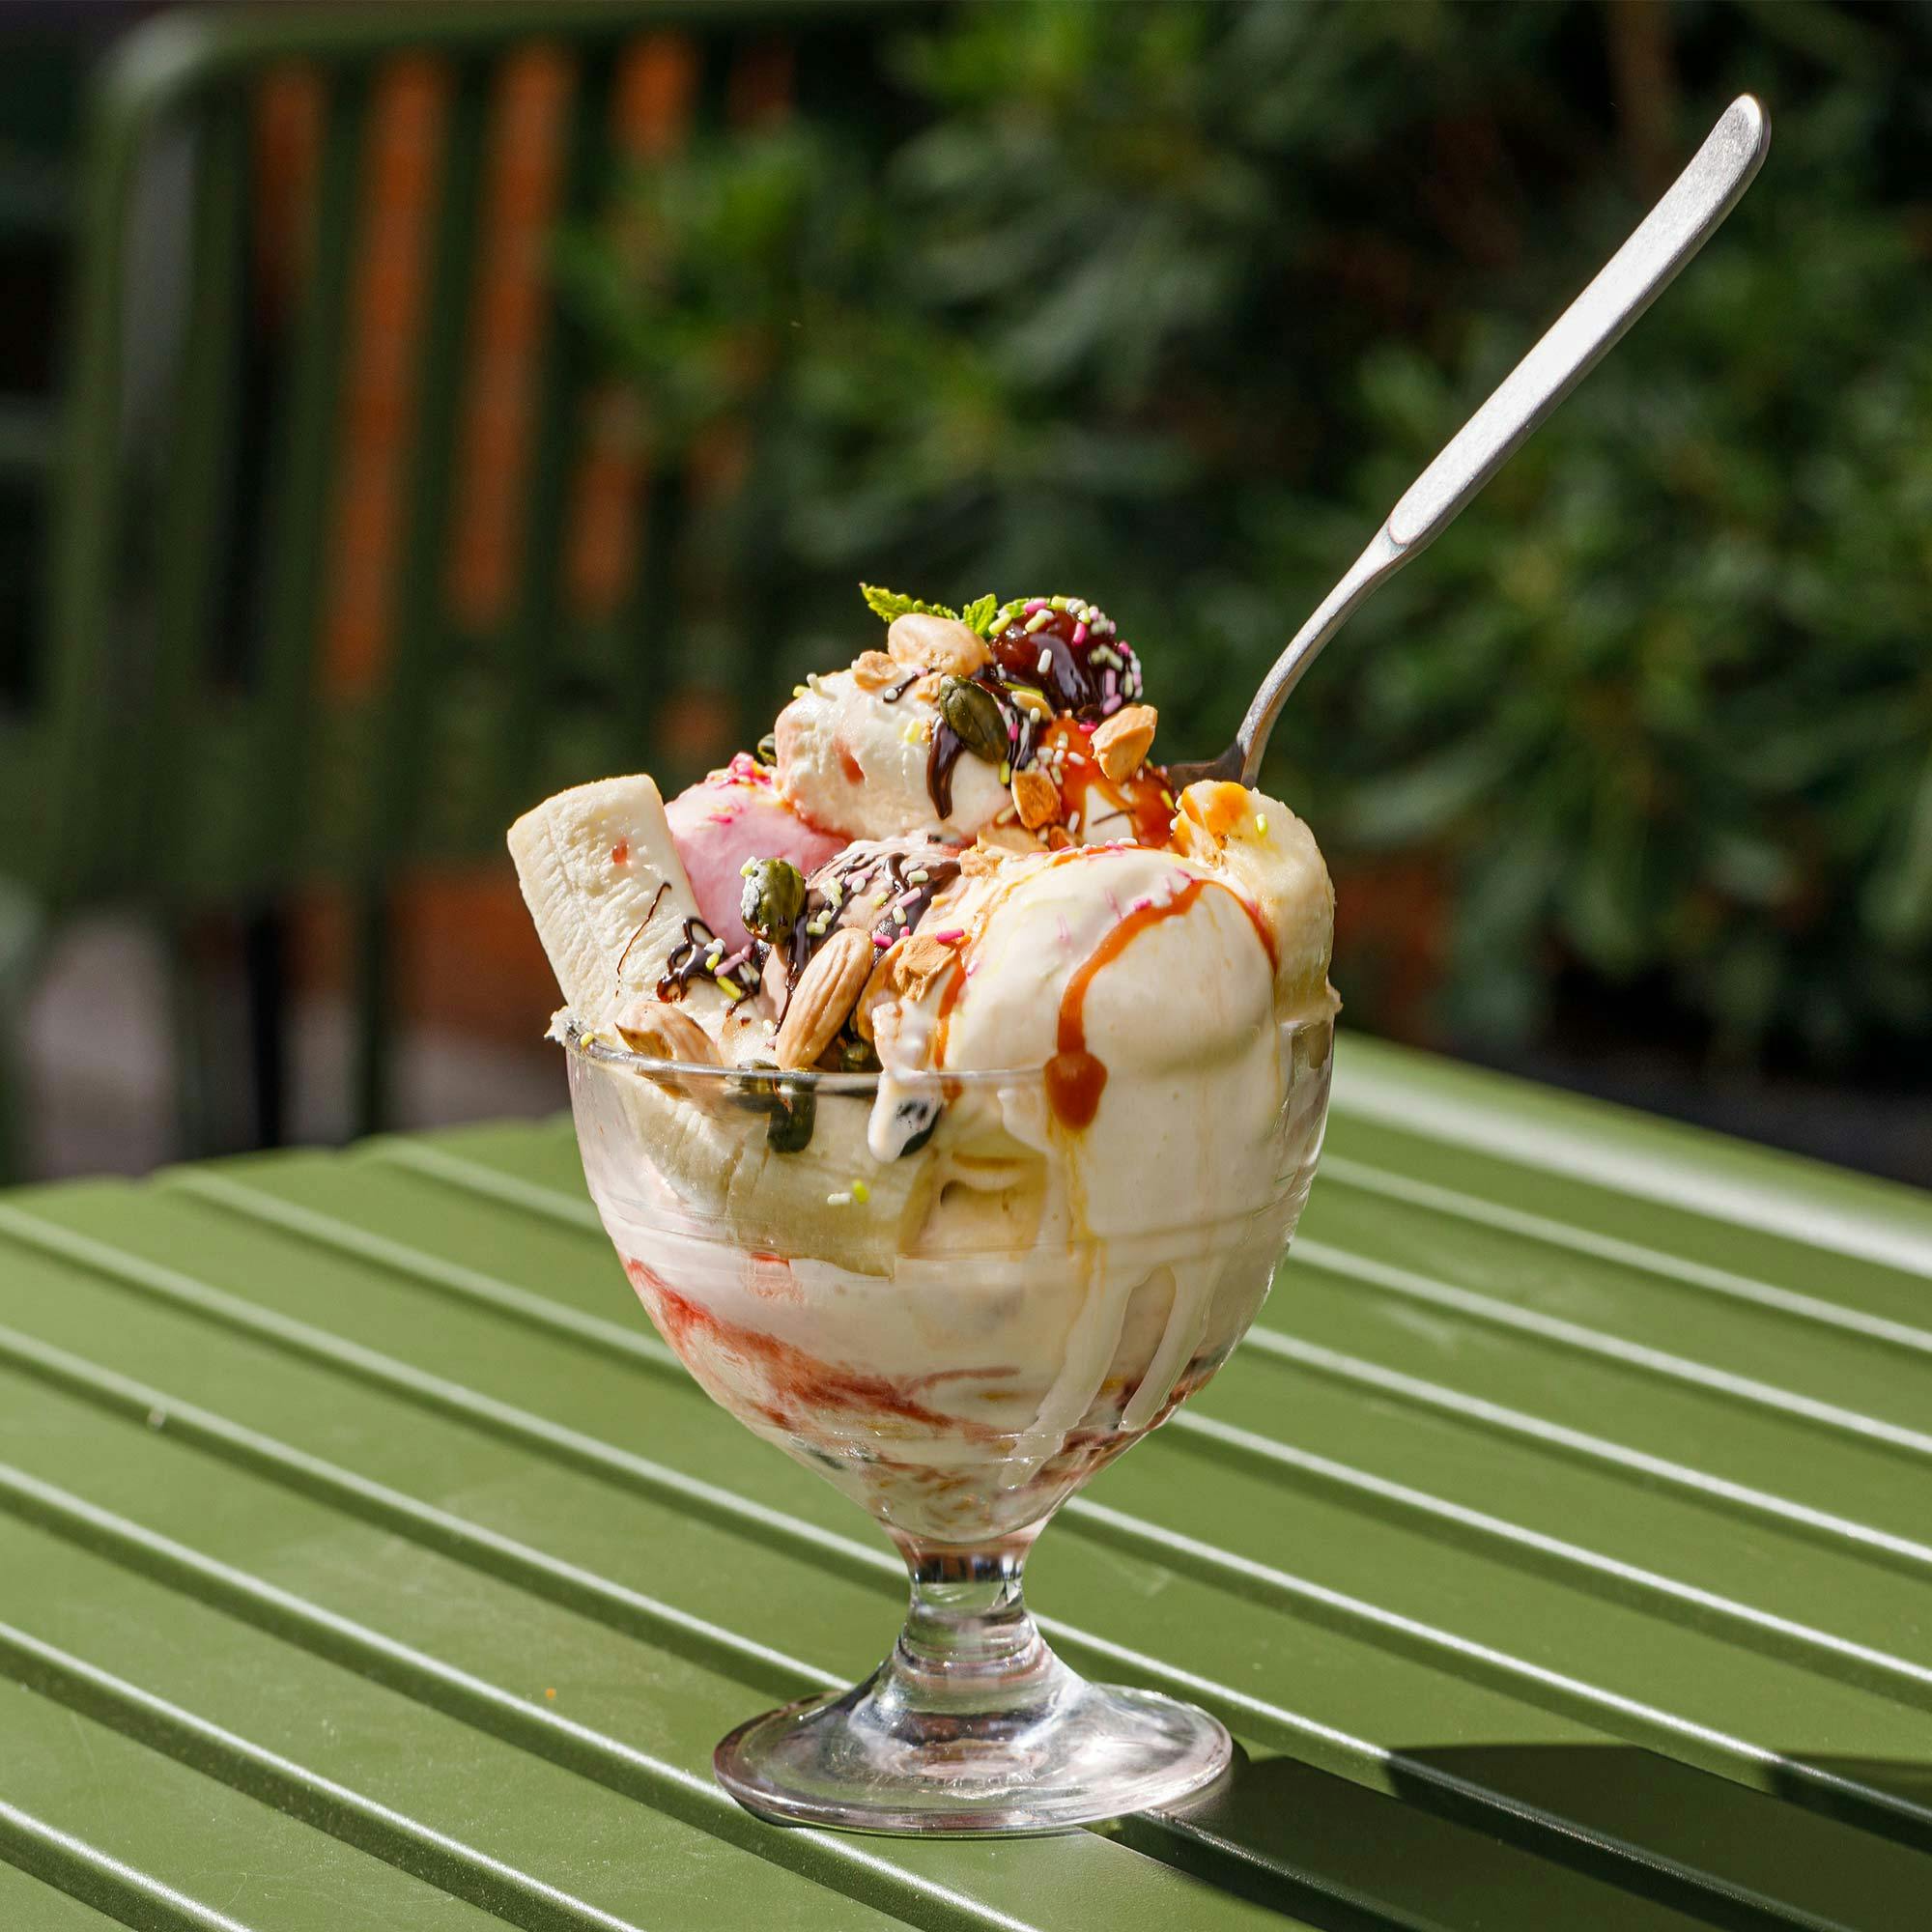 Scrumptious ice cream sundae with bananas, nuts and syrup served outdoors on a sunny day.